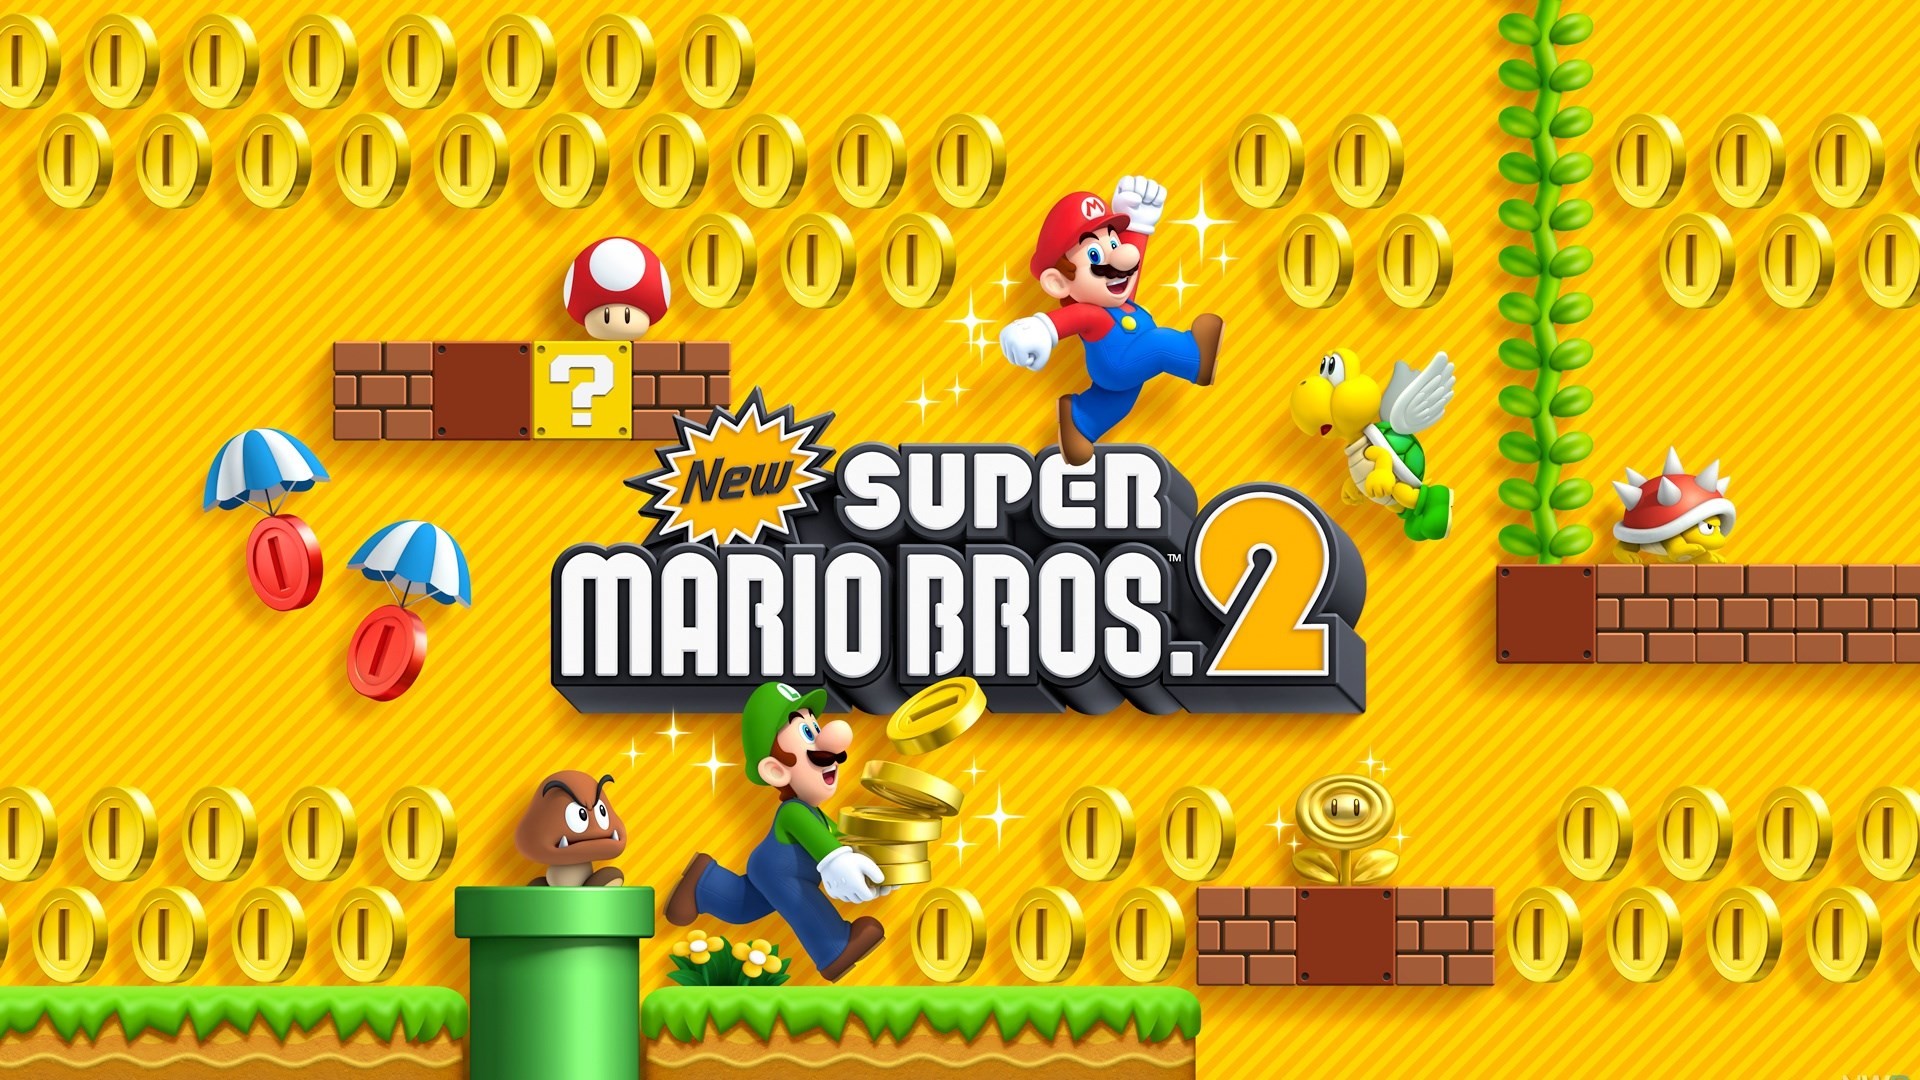 1920x1080 2017-03-23 - new super mario bros_ 2 picture - Full HD Wallpapers